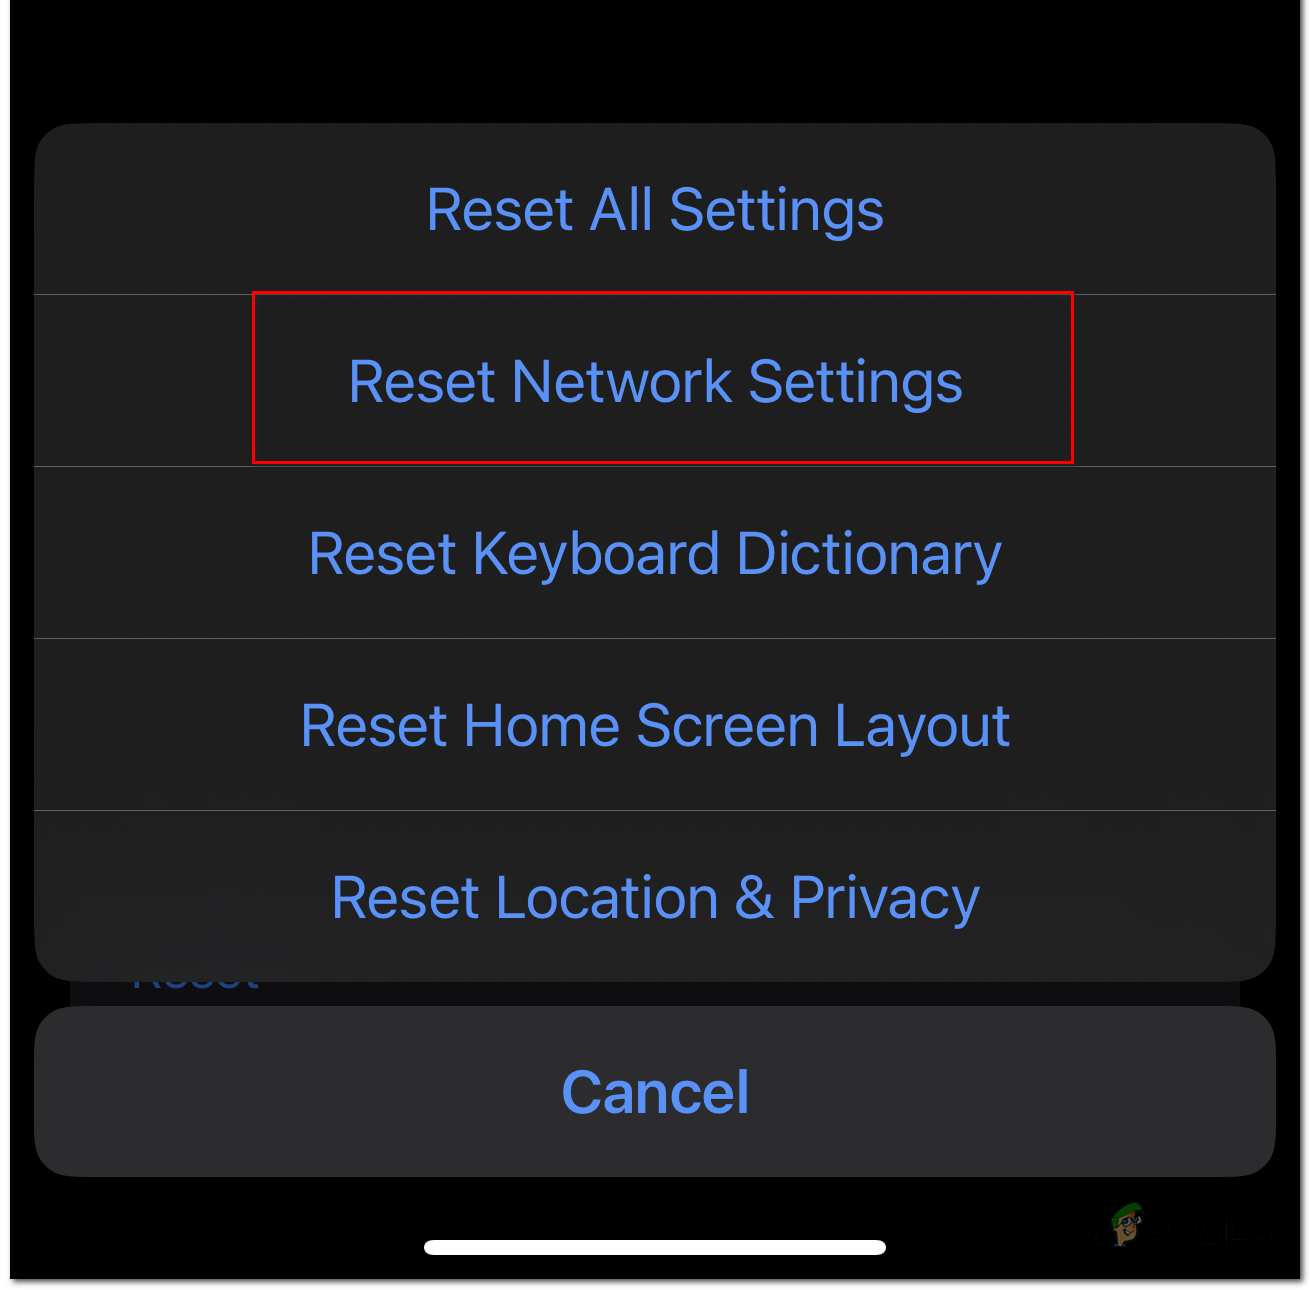 Click on "Reset Network Settings".